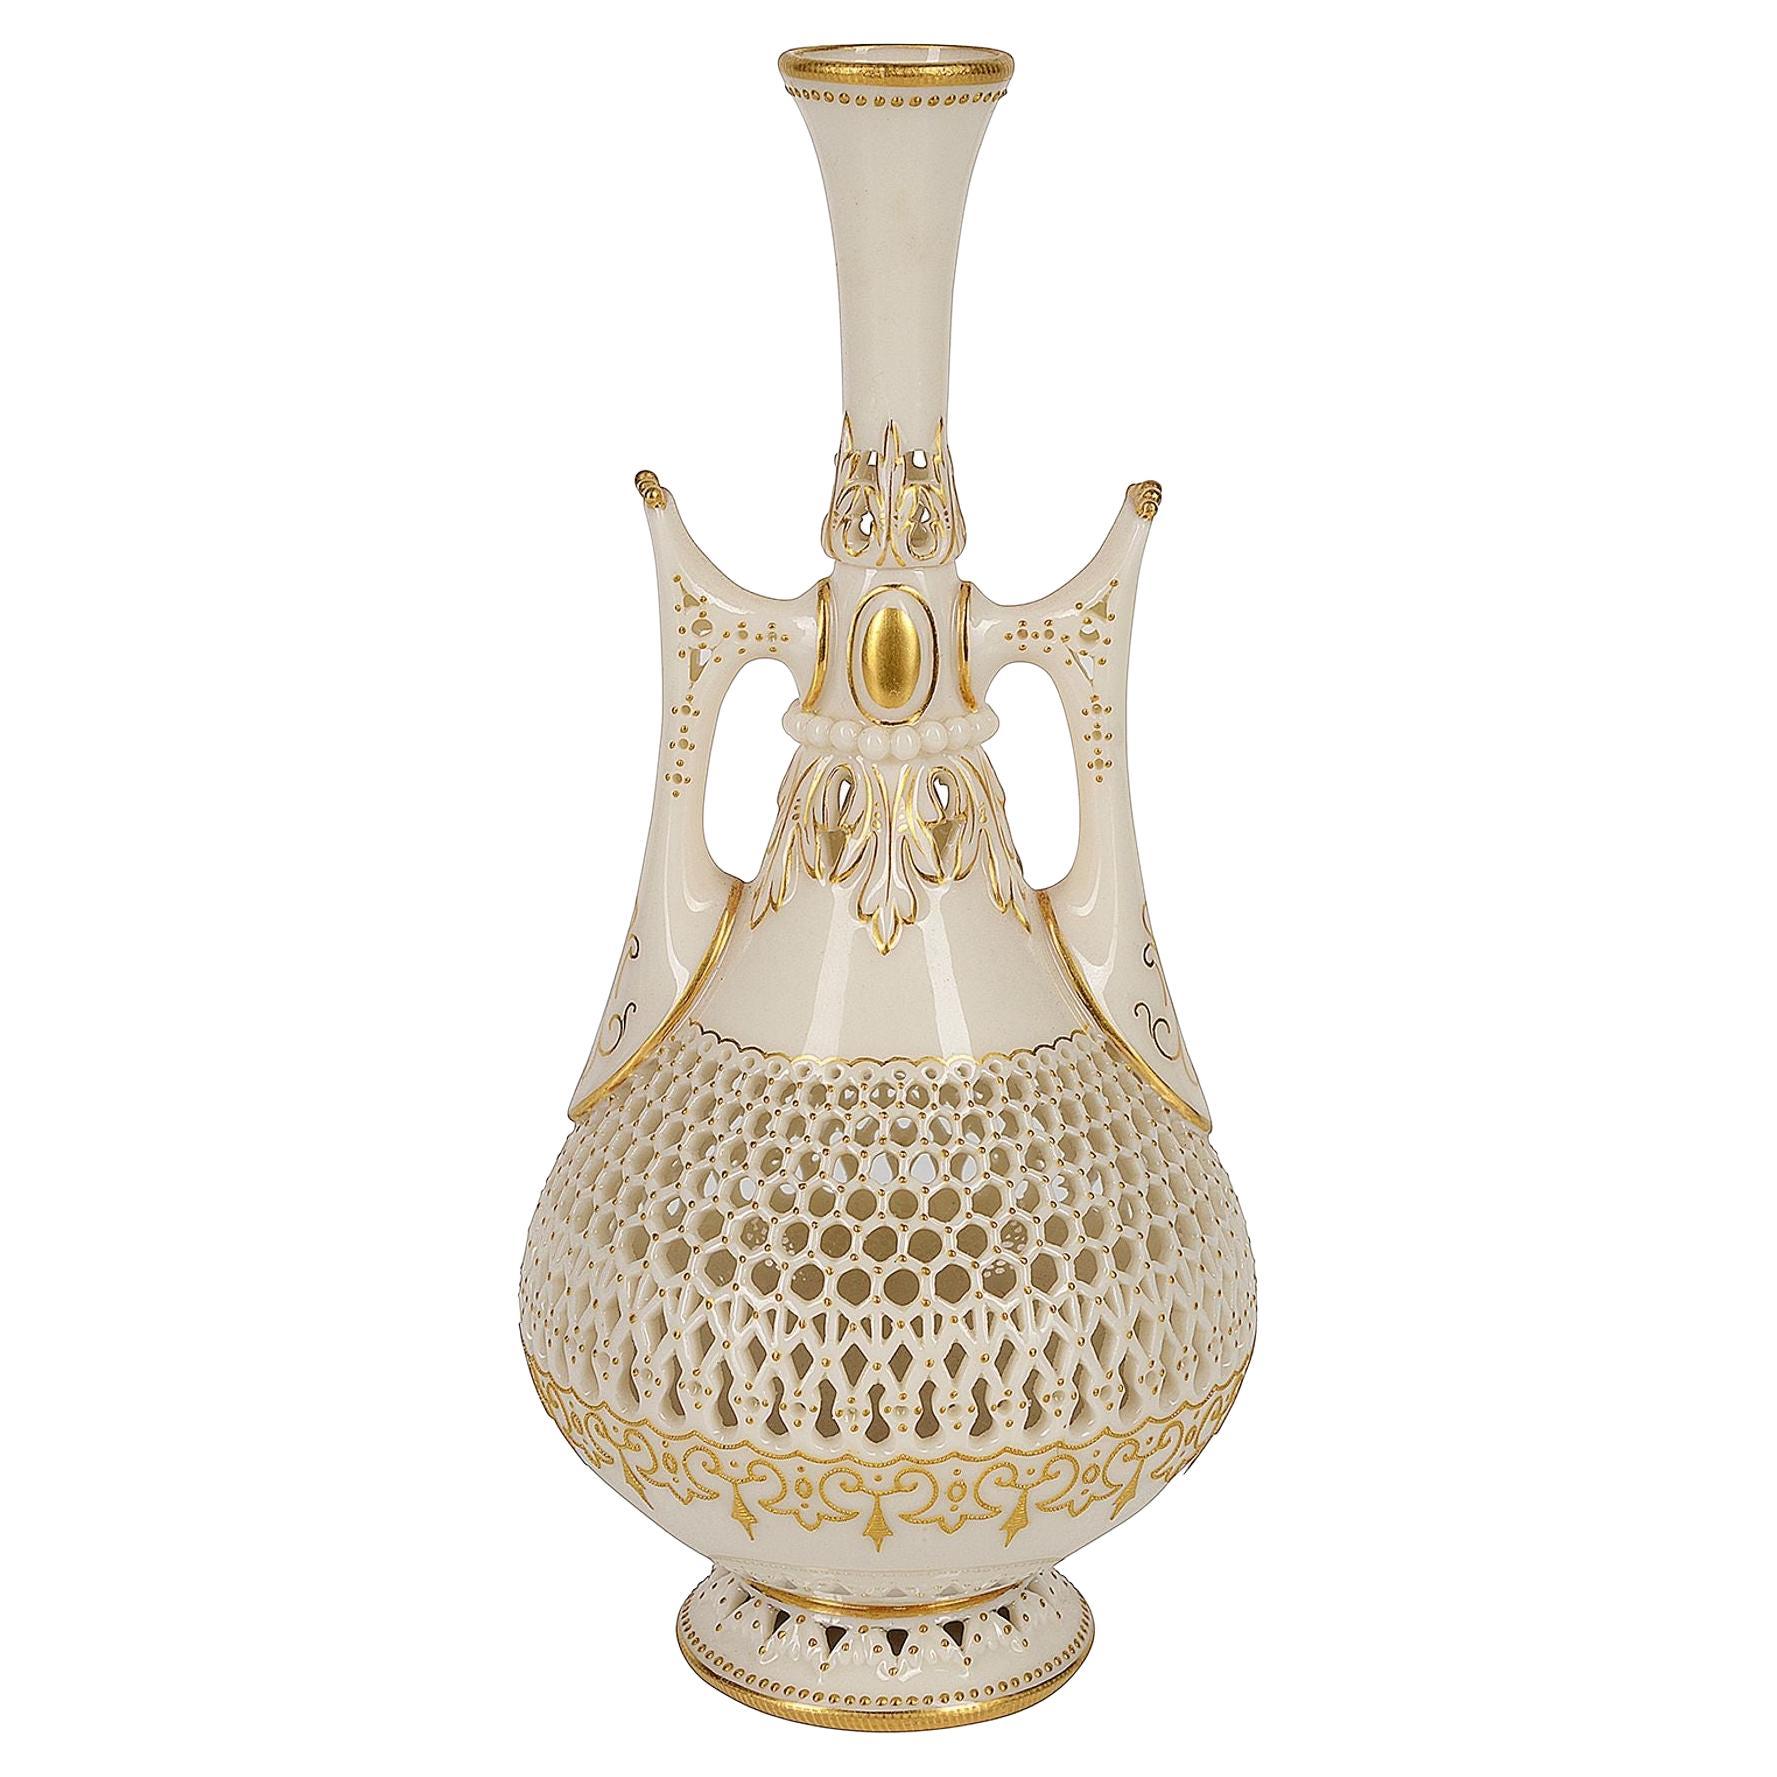 Royal Worchester Reticulated Two Handle Vase by George Owen